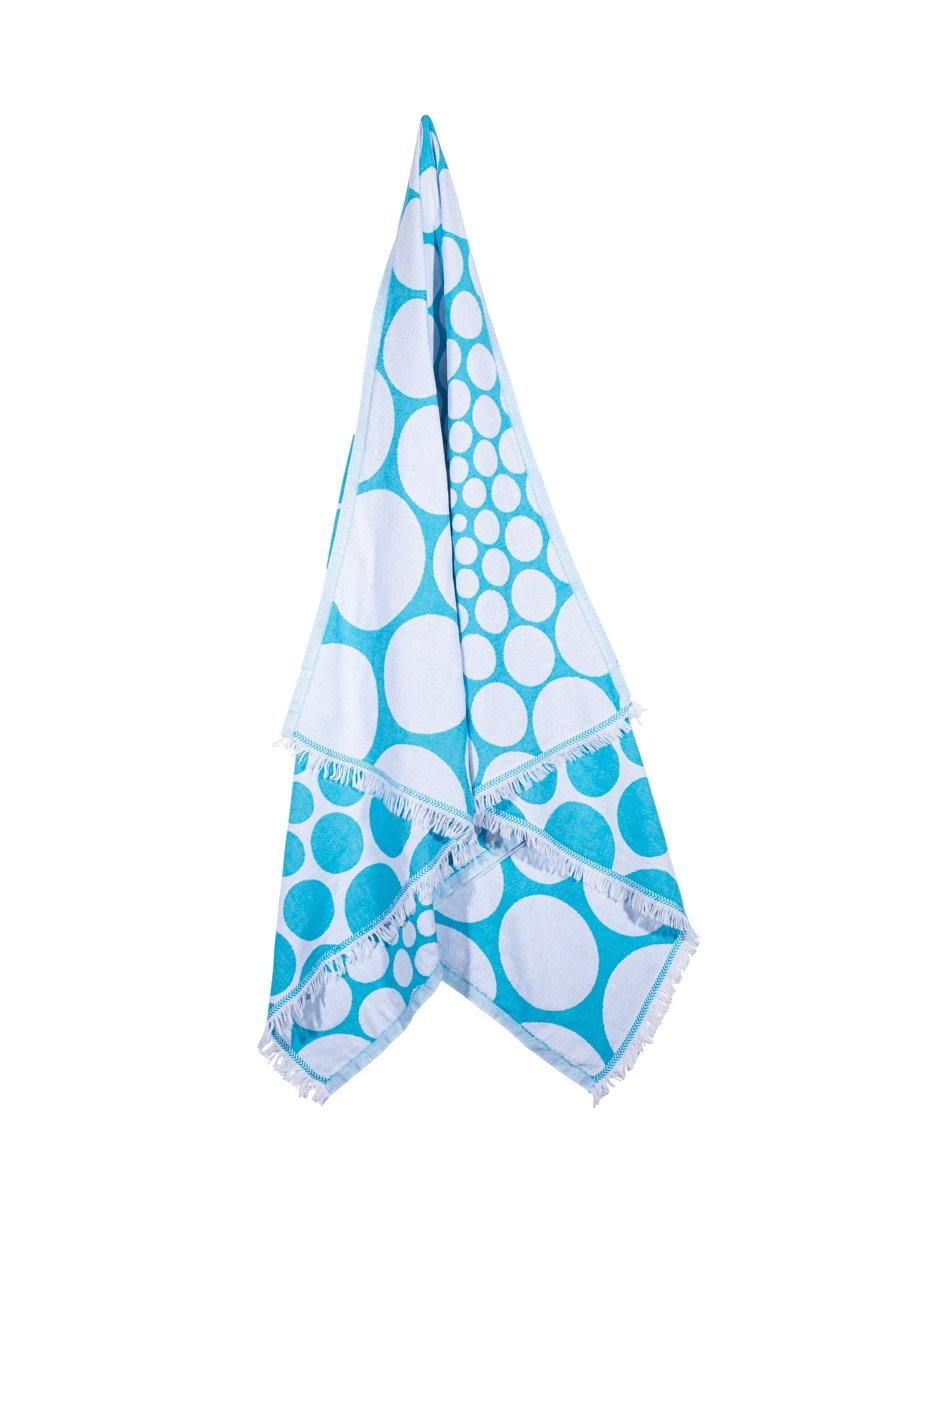 Bubbles - Spotty Turquoise Design Hanging Up